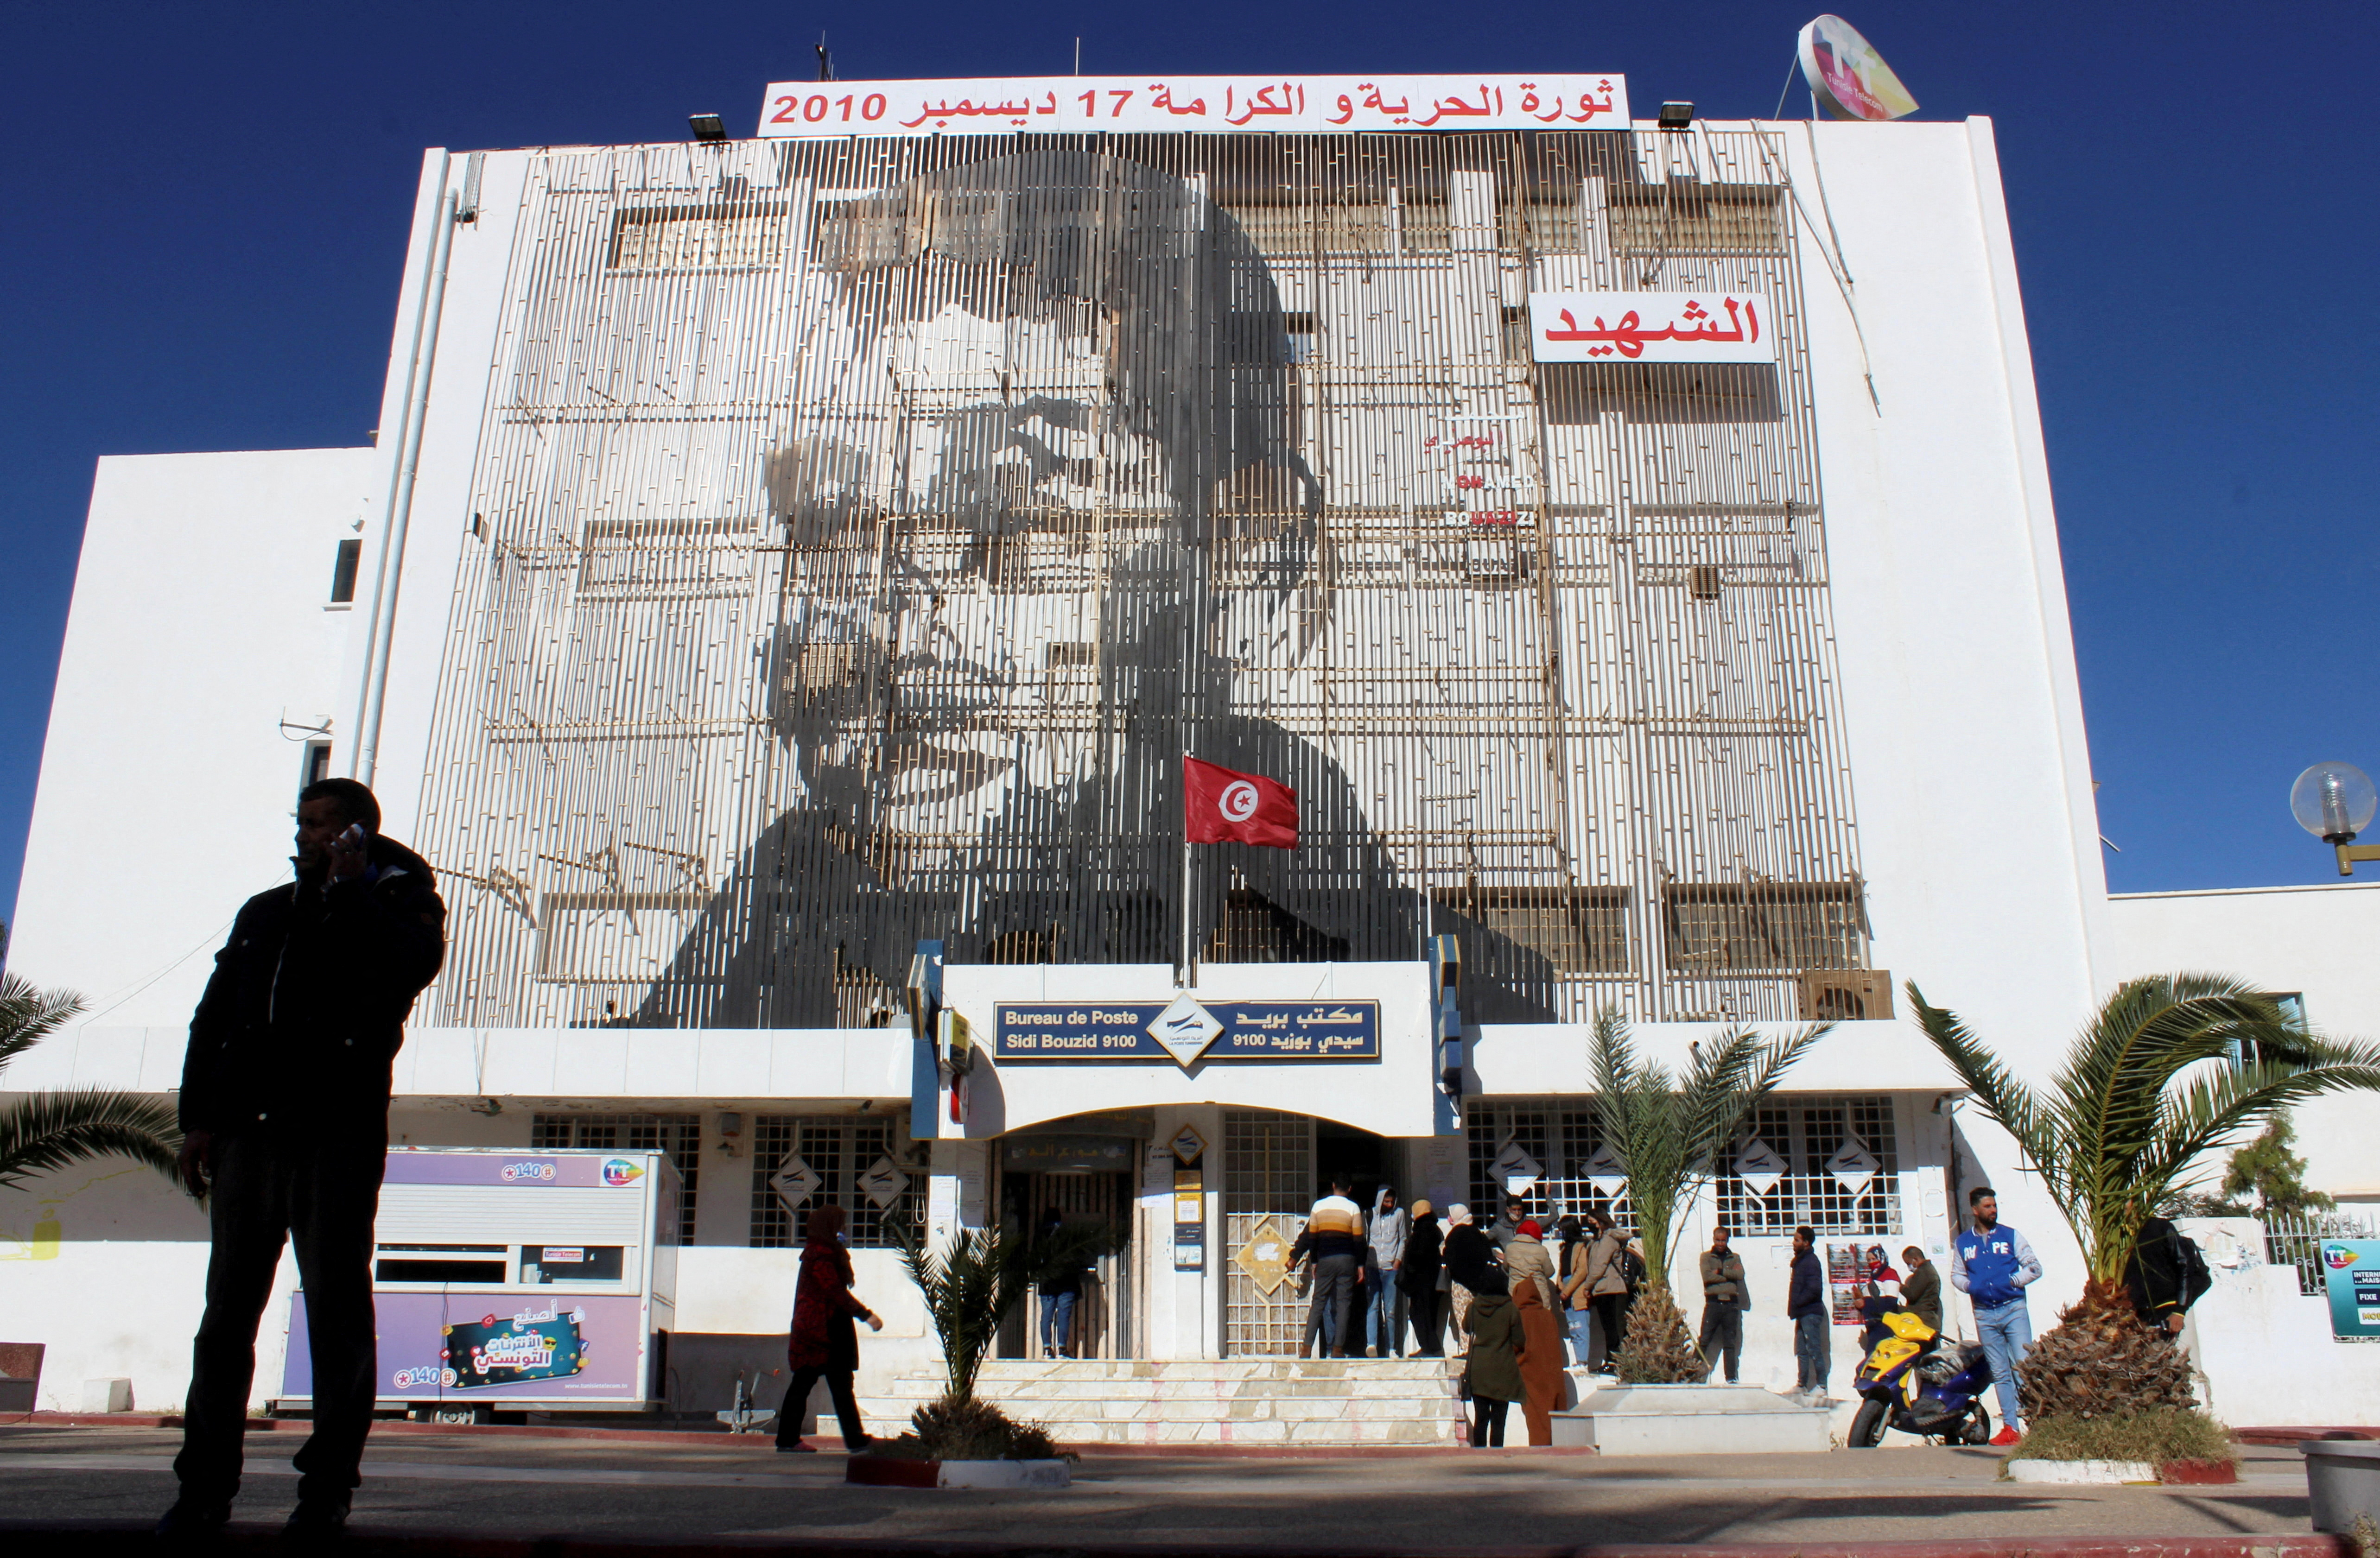 Picture of Bouazizi is displayed on the post office building in Sidi Bouzid